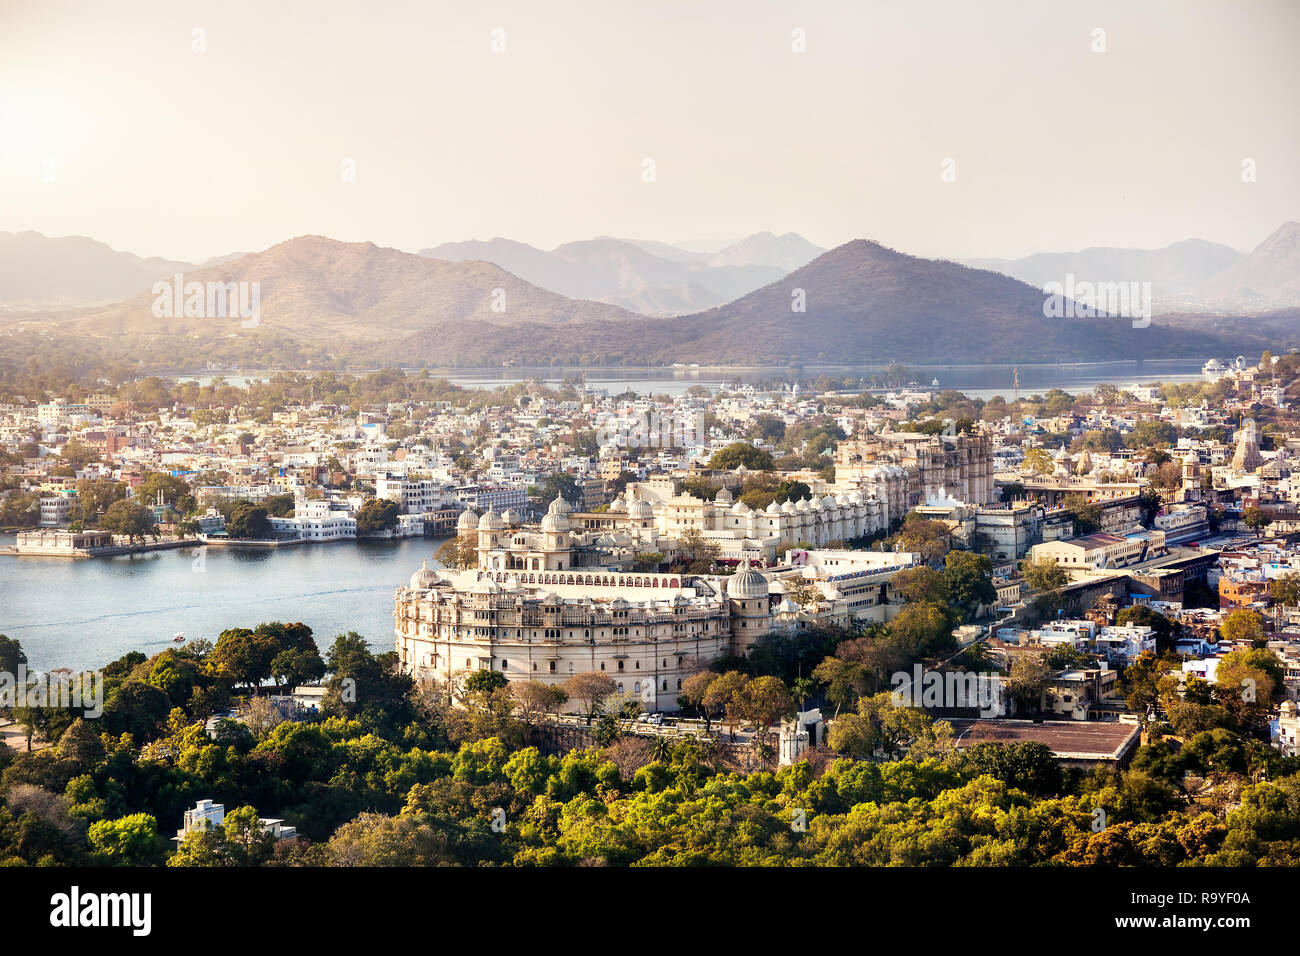 Lake Pichola with City Palace view in Udaipur, Rajasthan, India Stock Photo